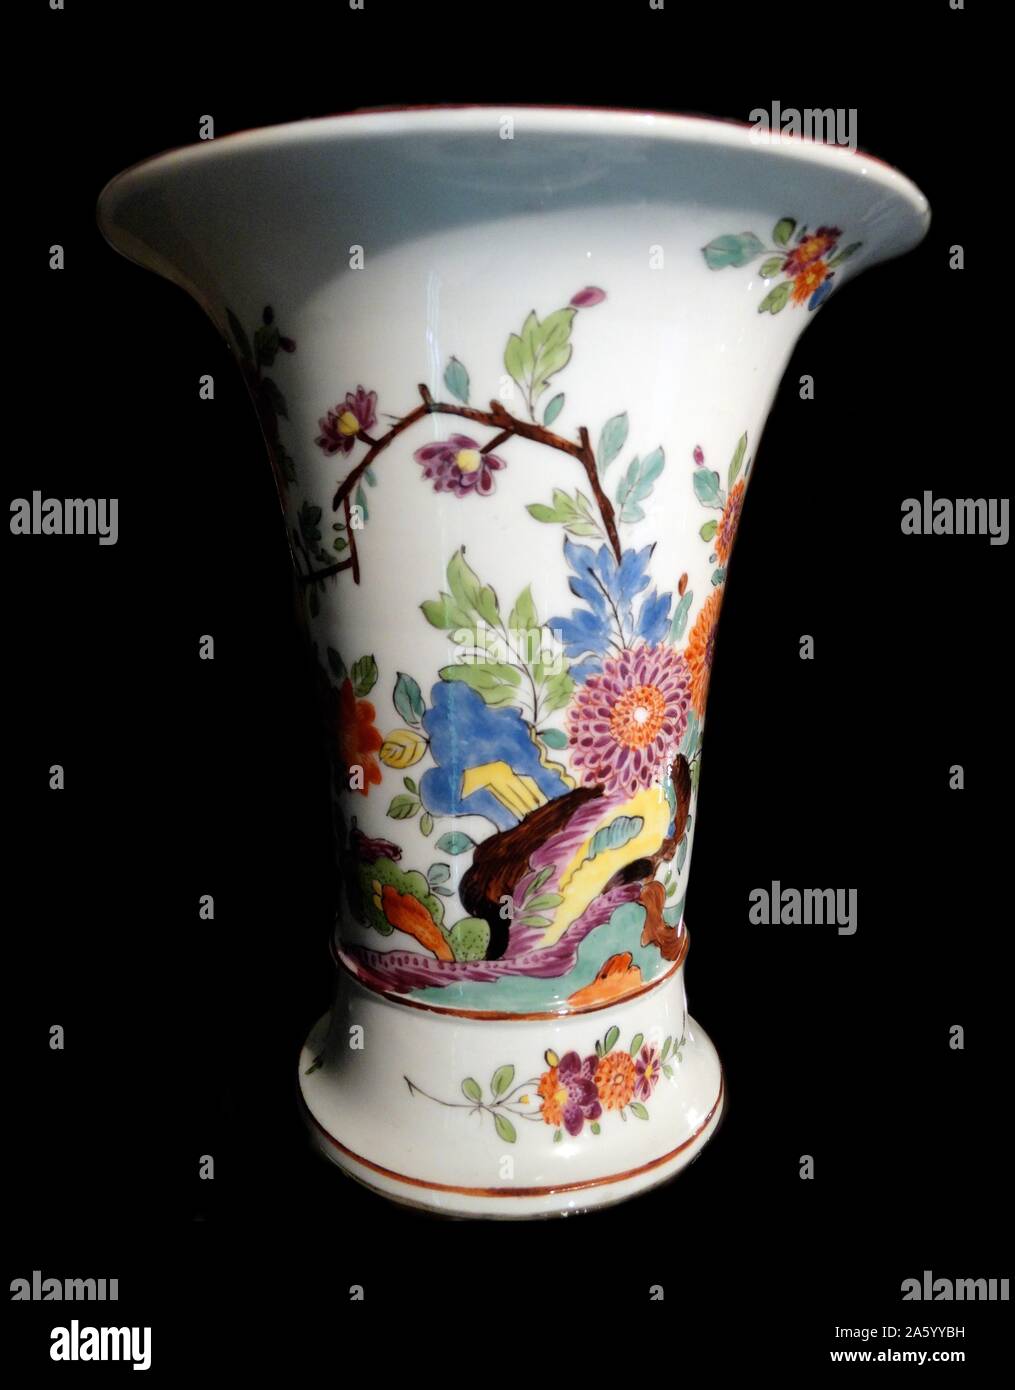 German vase made by the Meissen porcelain factory, Germany. Hard-paste porcelain, about,1745 Stock Photo